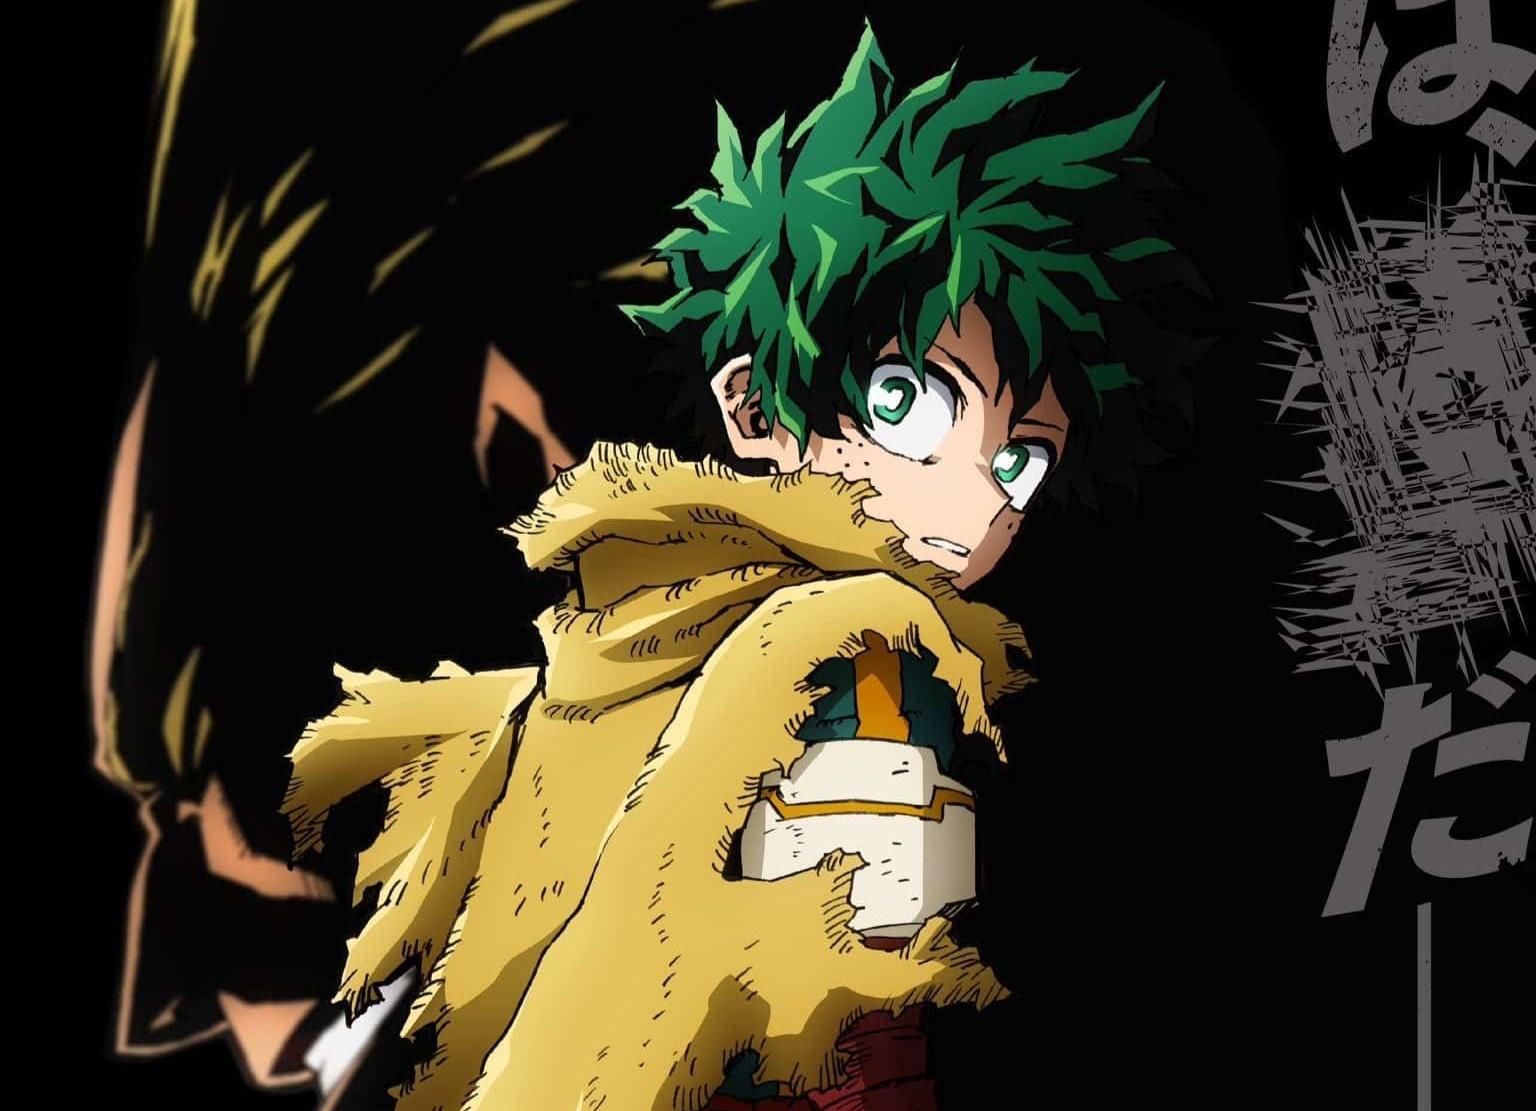 My Hero Academia A Fourth Film Based On The Manga Announced With